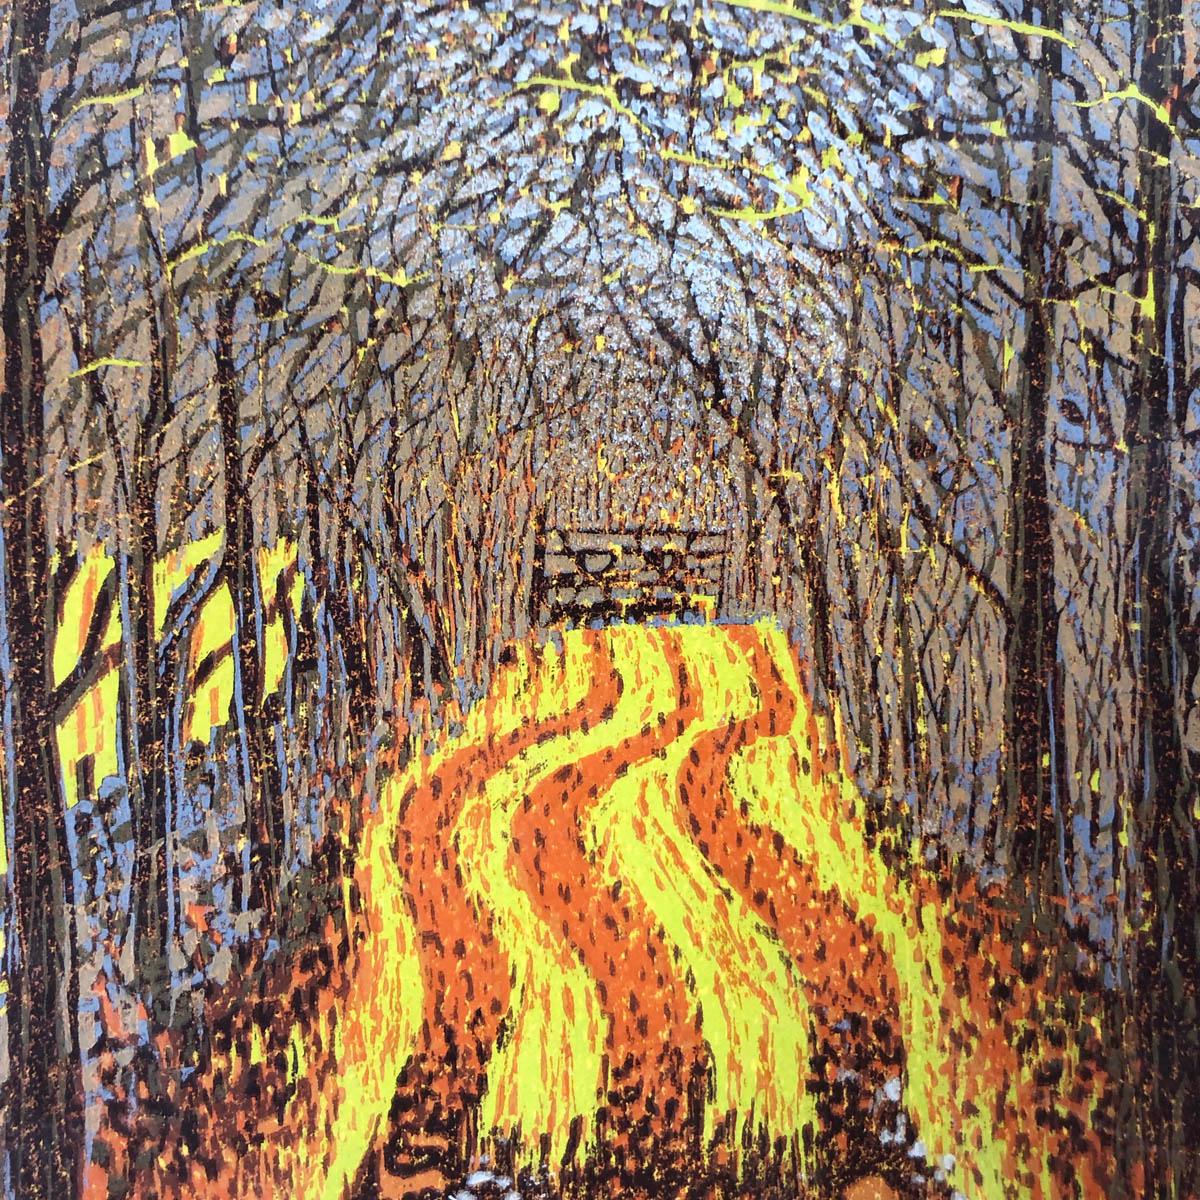 Autumn Lane by Printmaker, Mark A Pearce is an original hand printed Reduction Linocut made from just one block, which is reduced with each colour that he adds. This means no more prints can ever be produced from the block with an edition size of